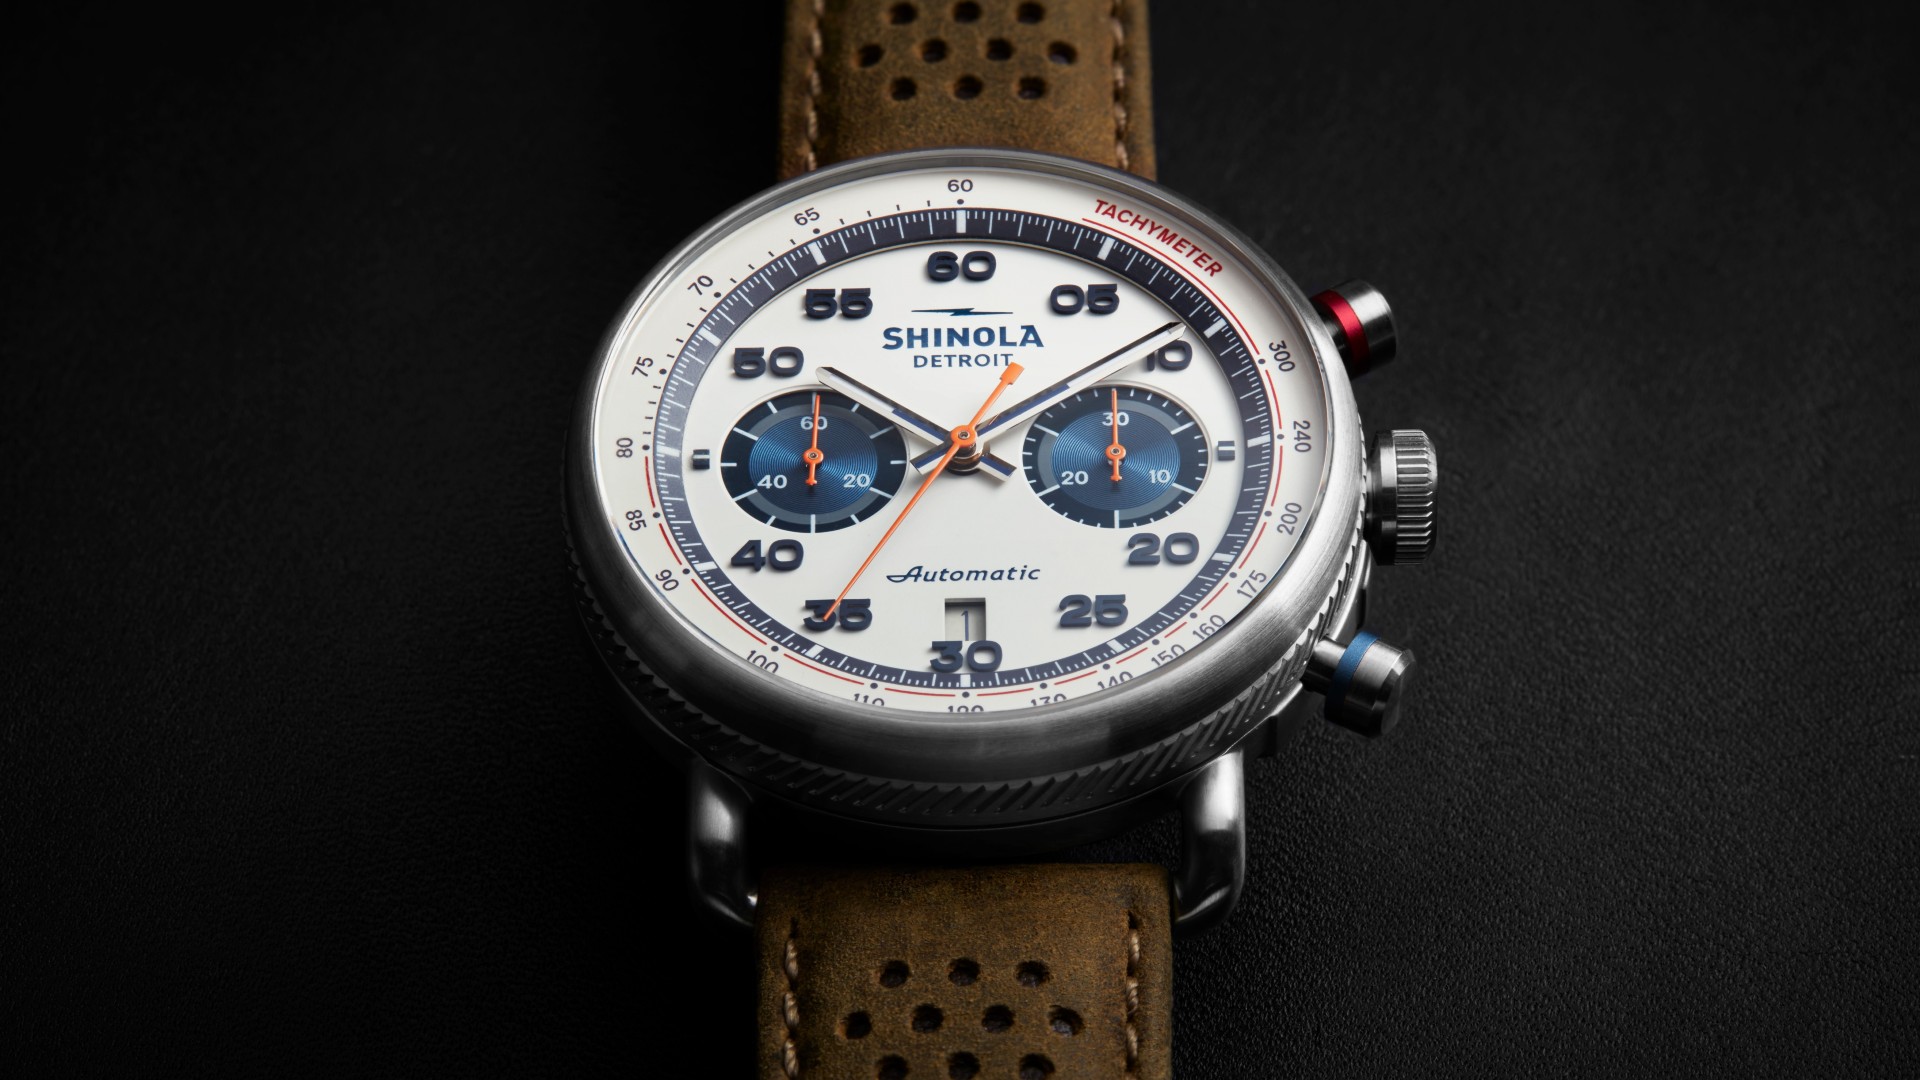 Shinola Detroit is the official timekeeper of the Chevrolet Detroit Grand Prix Presented by Lear